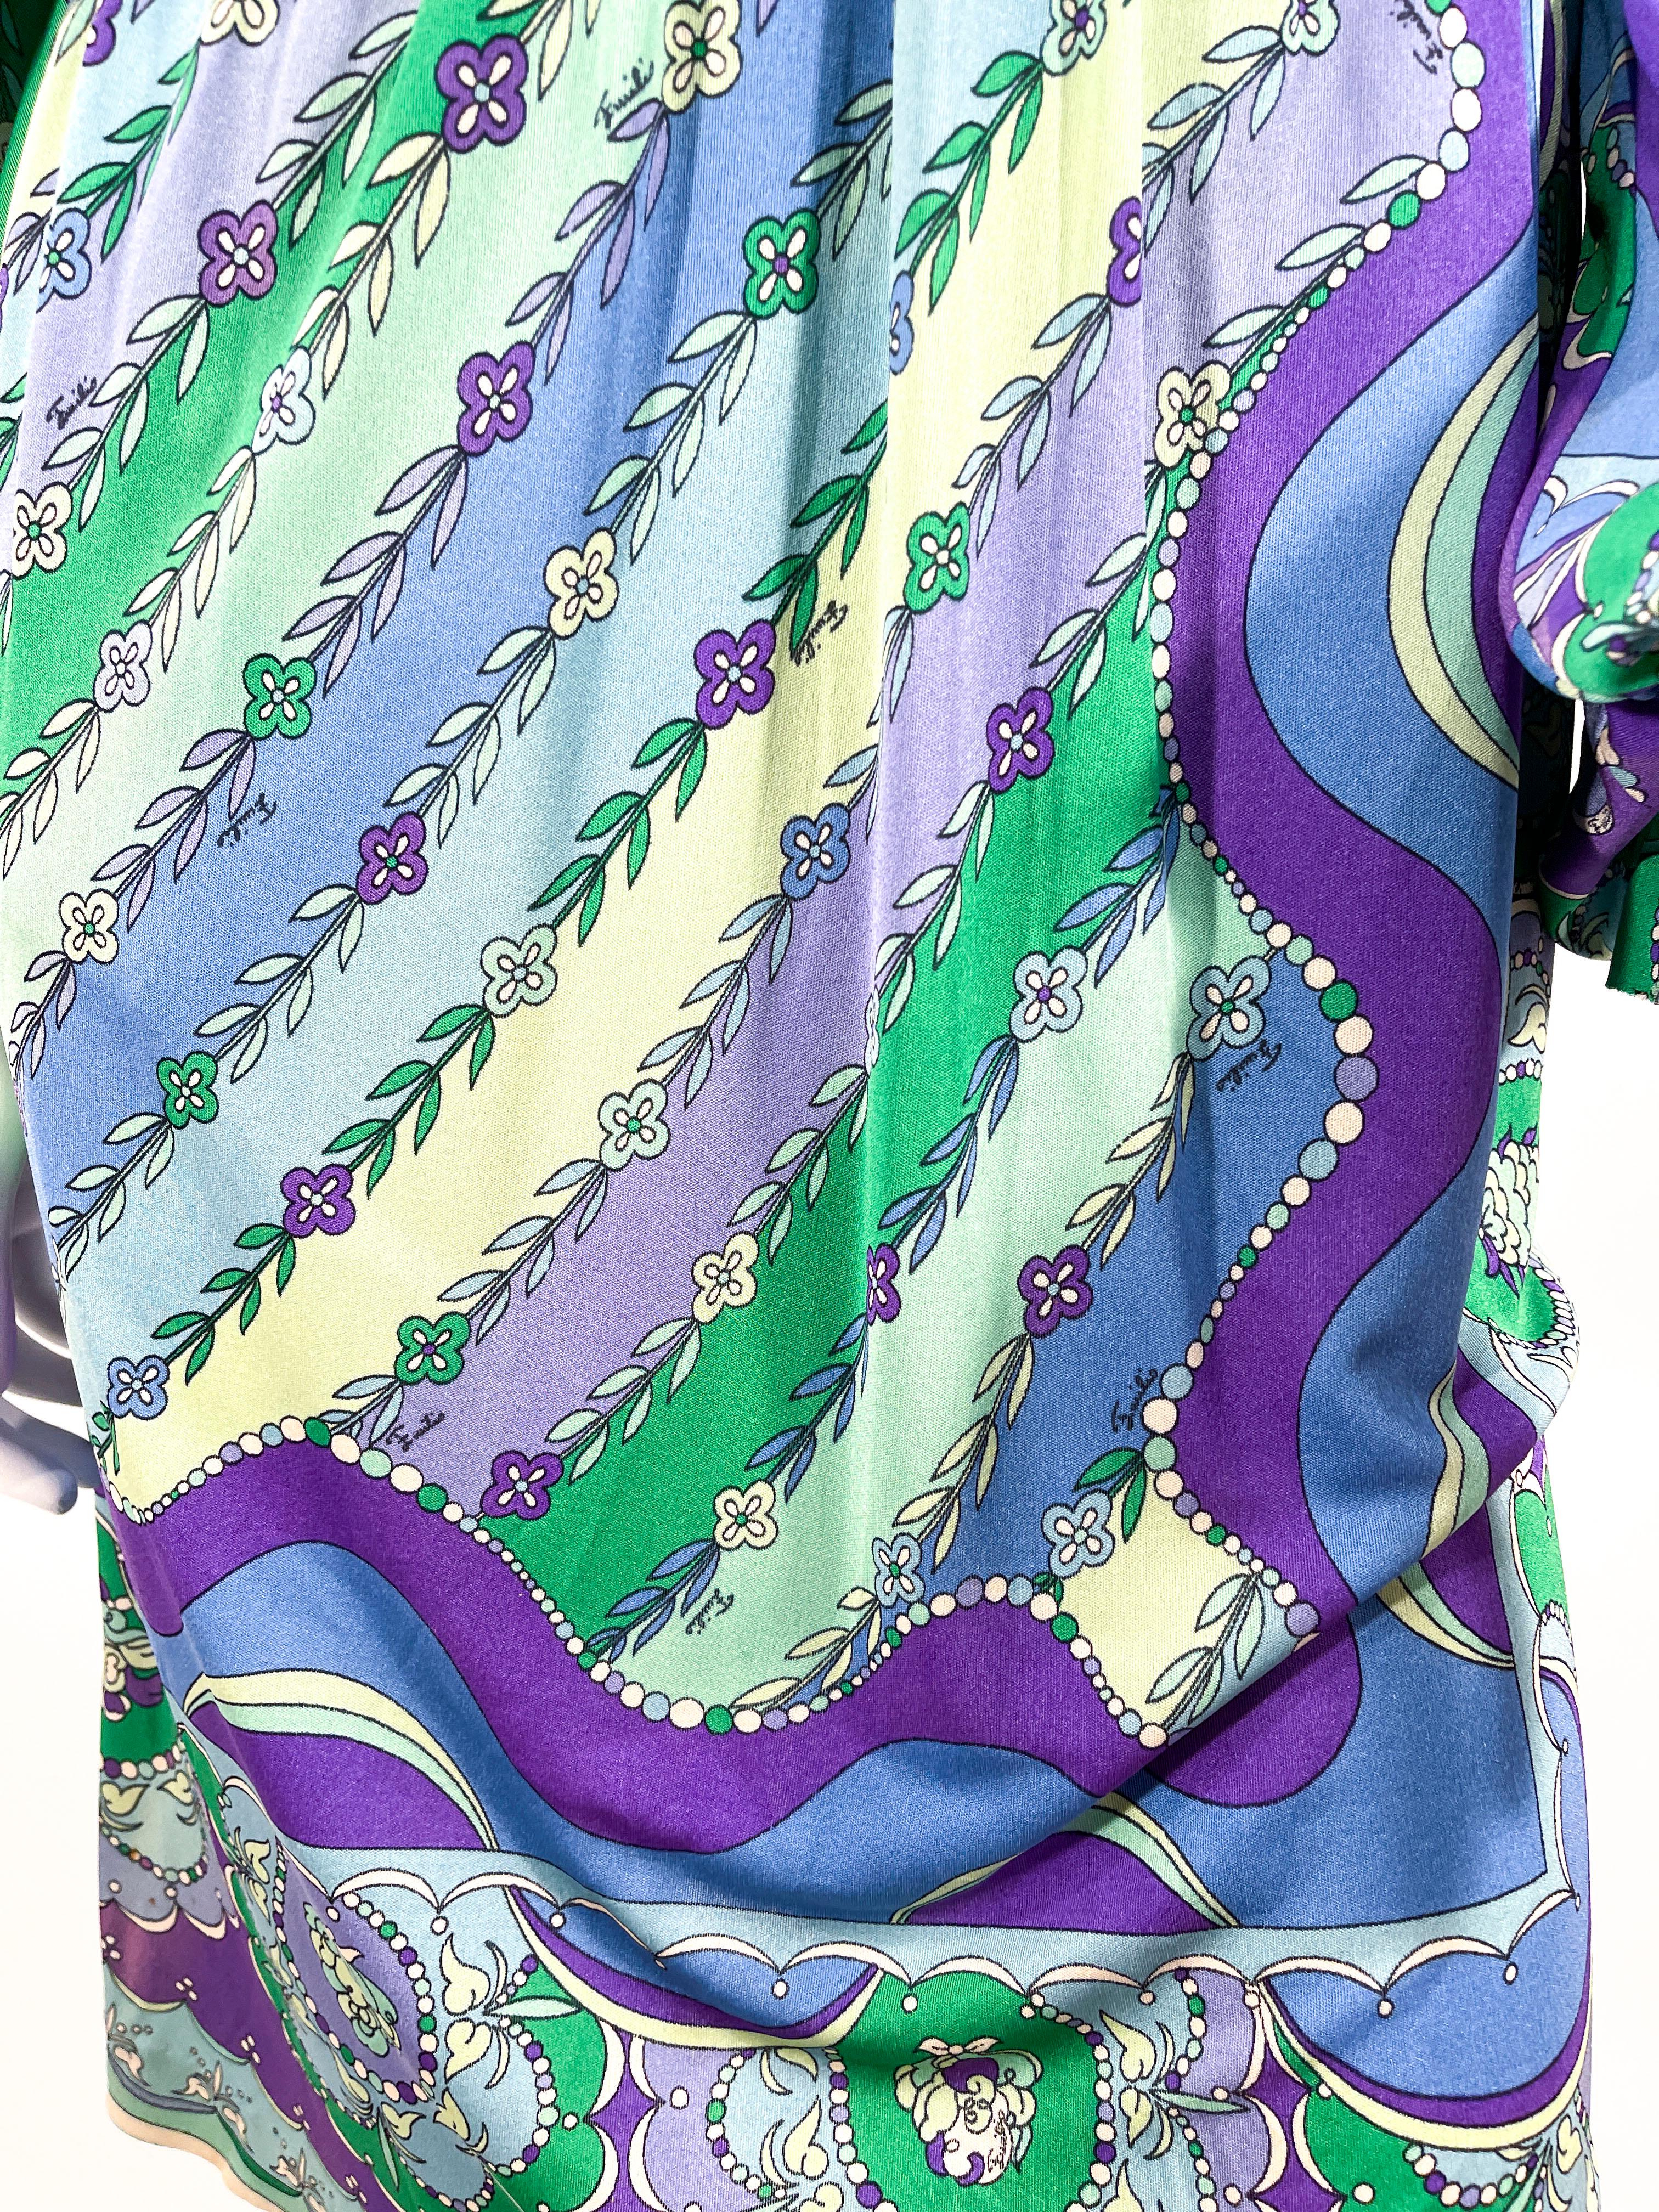 Women's 1960s Emilio Pucci Printed Dress For Sale